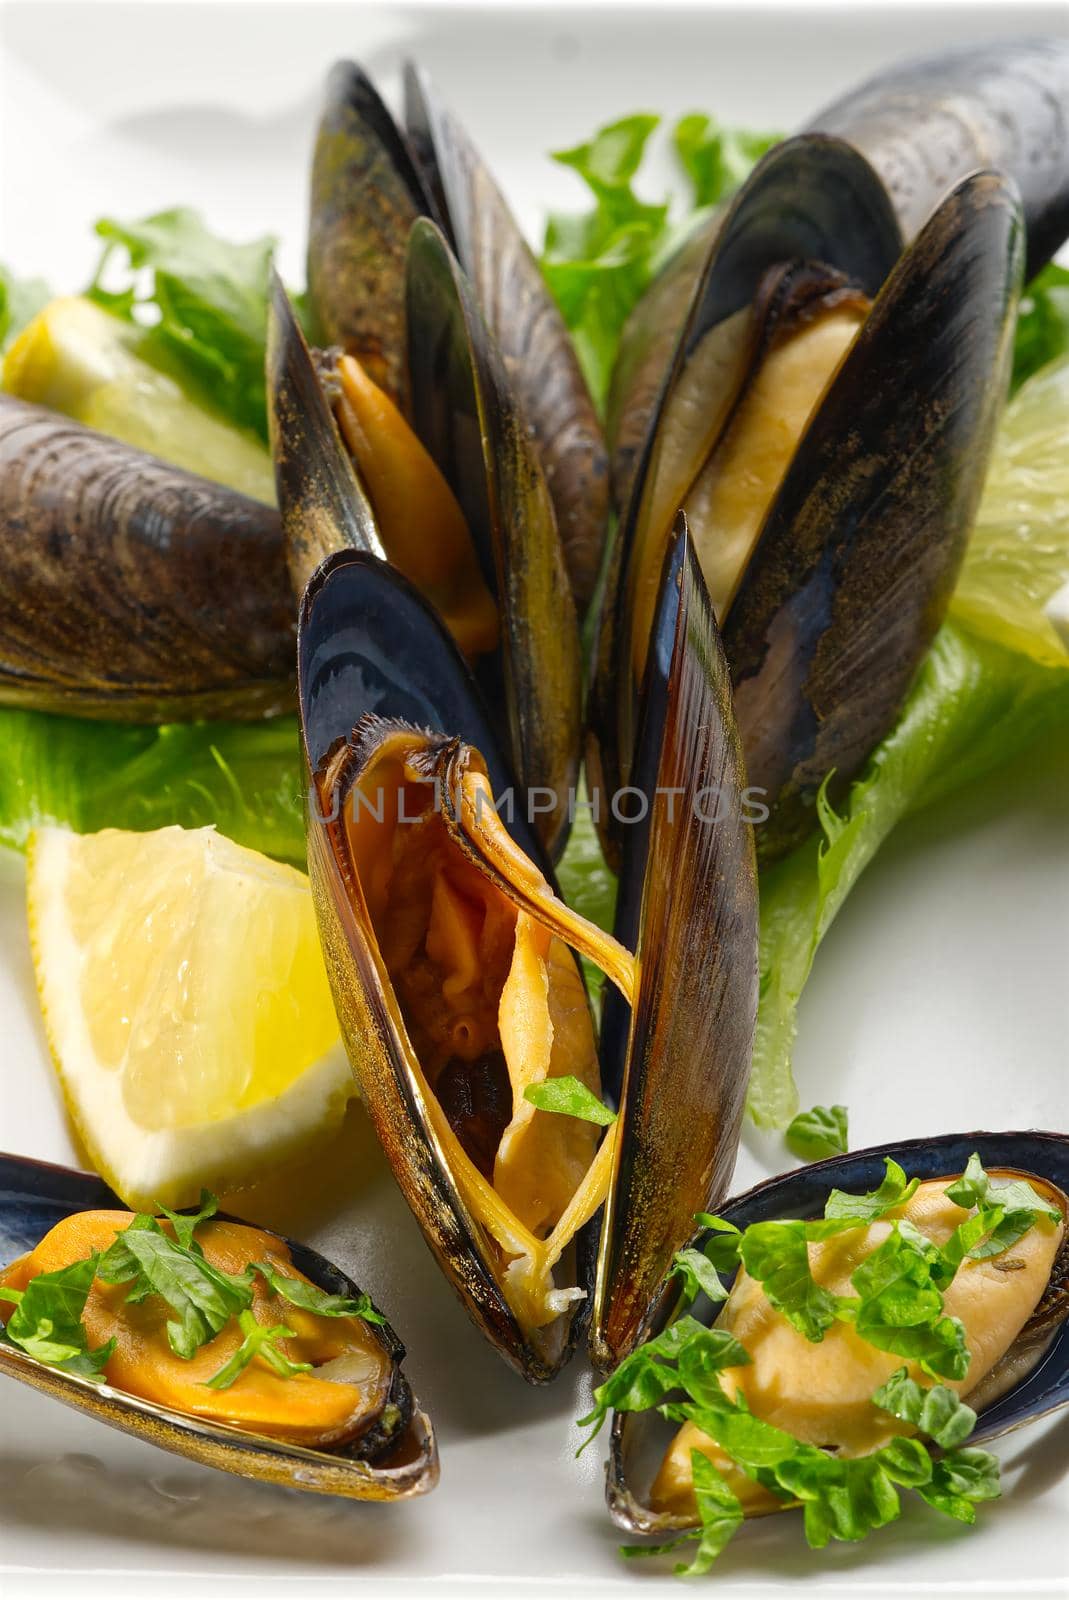 Mussels in sauce. Shellfish dish. Seafood dishes. Fresh Mussels.